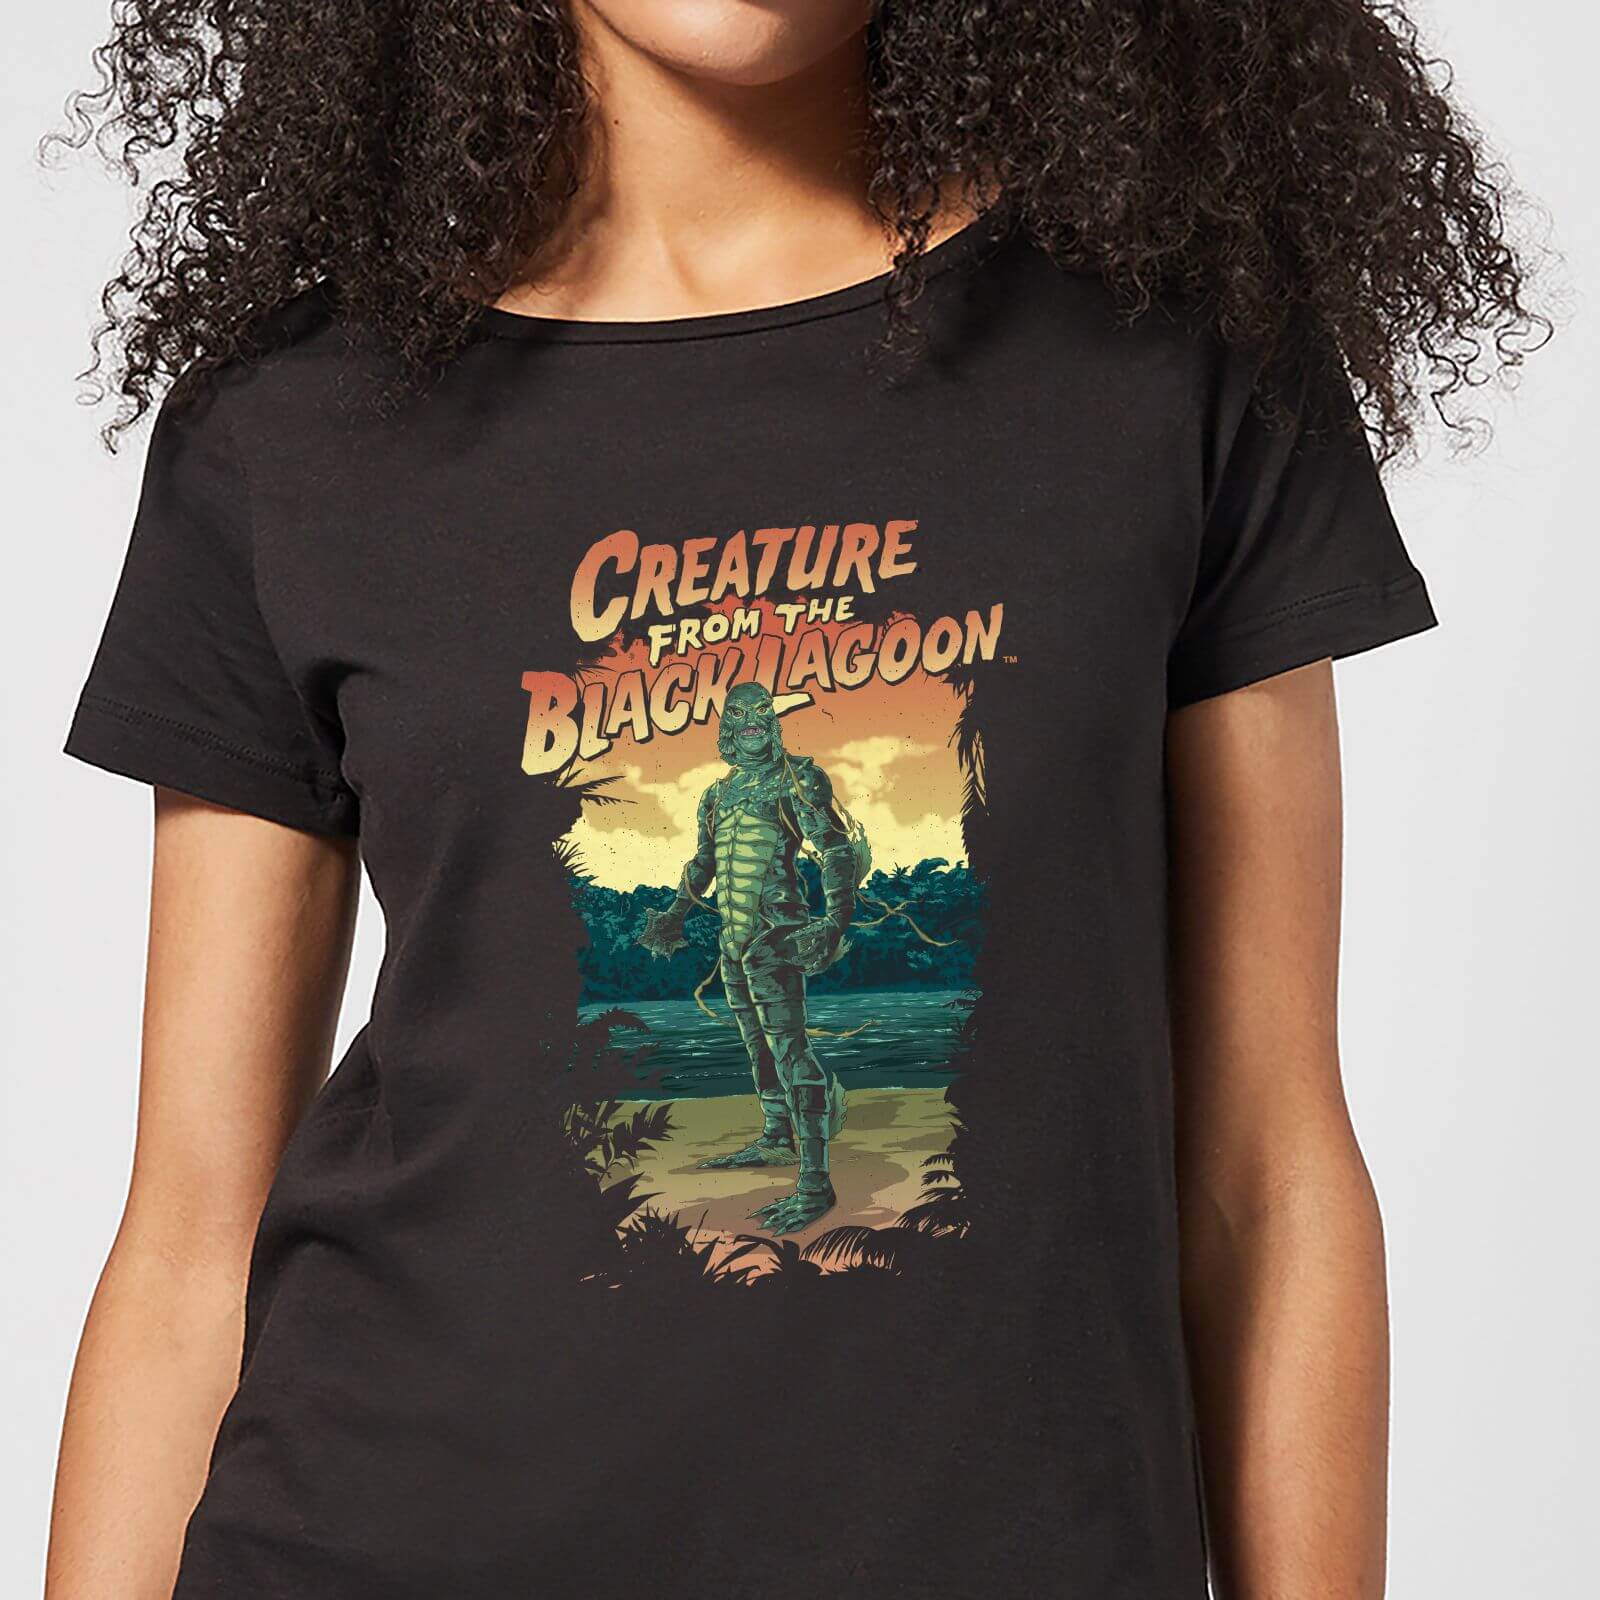 Universal Monsters Creature From The Black Lagoon Illustrated Women's T-Shirt - Black - 4XL